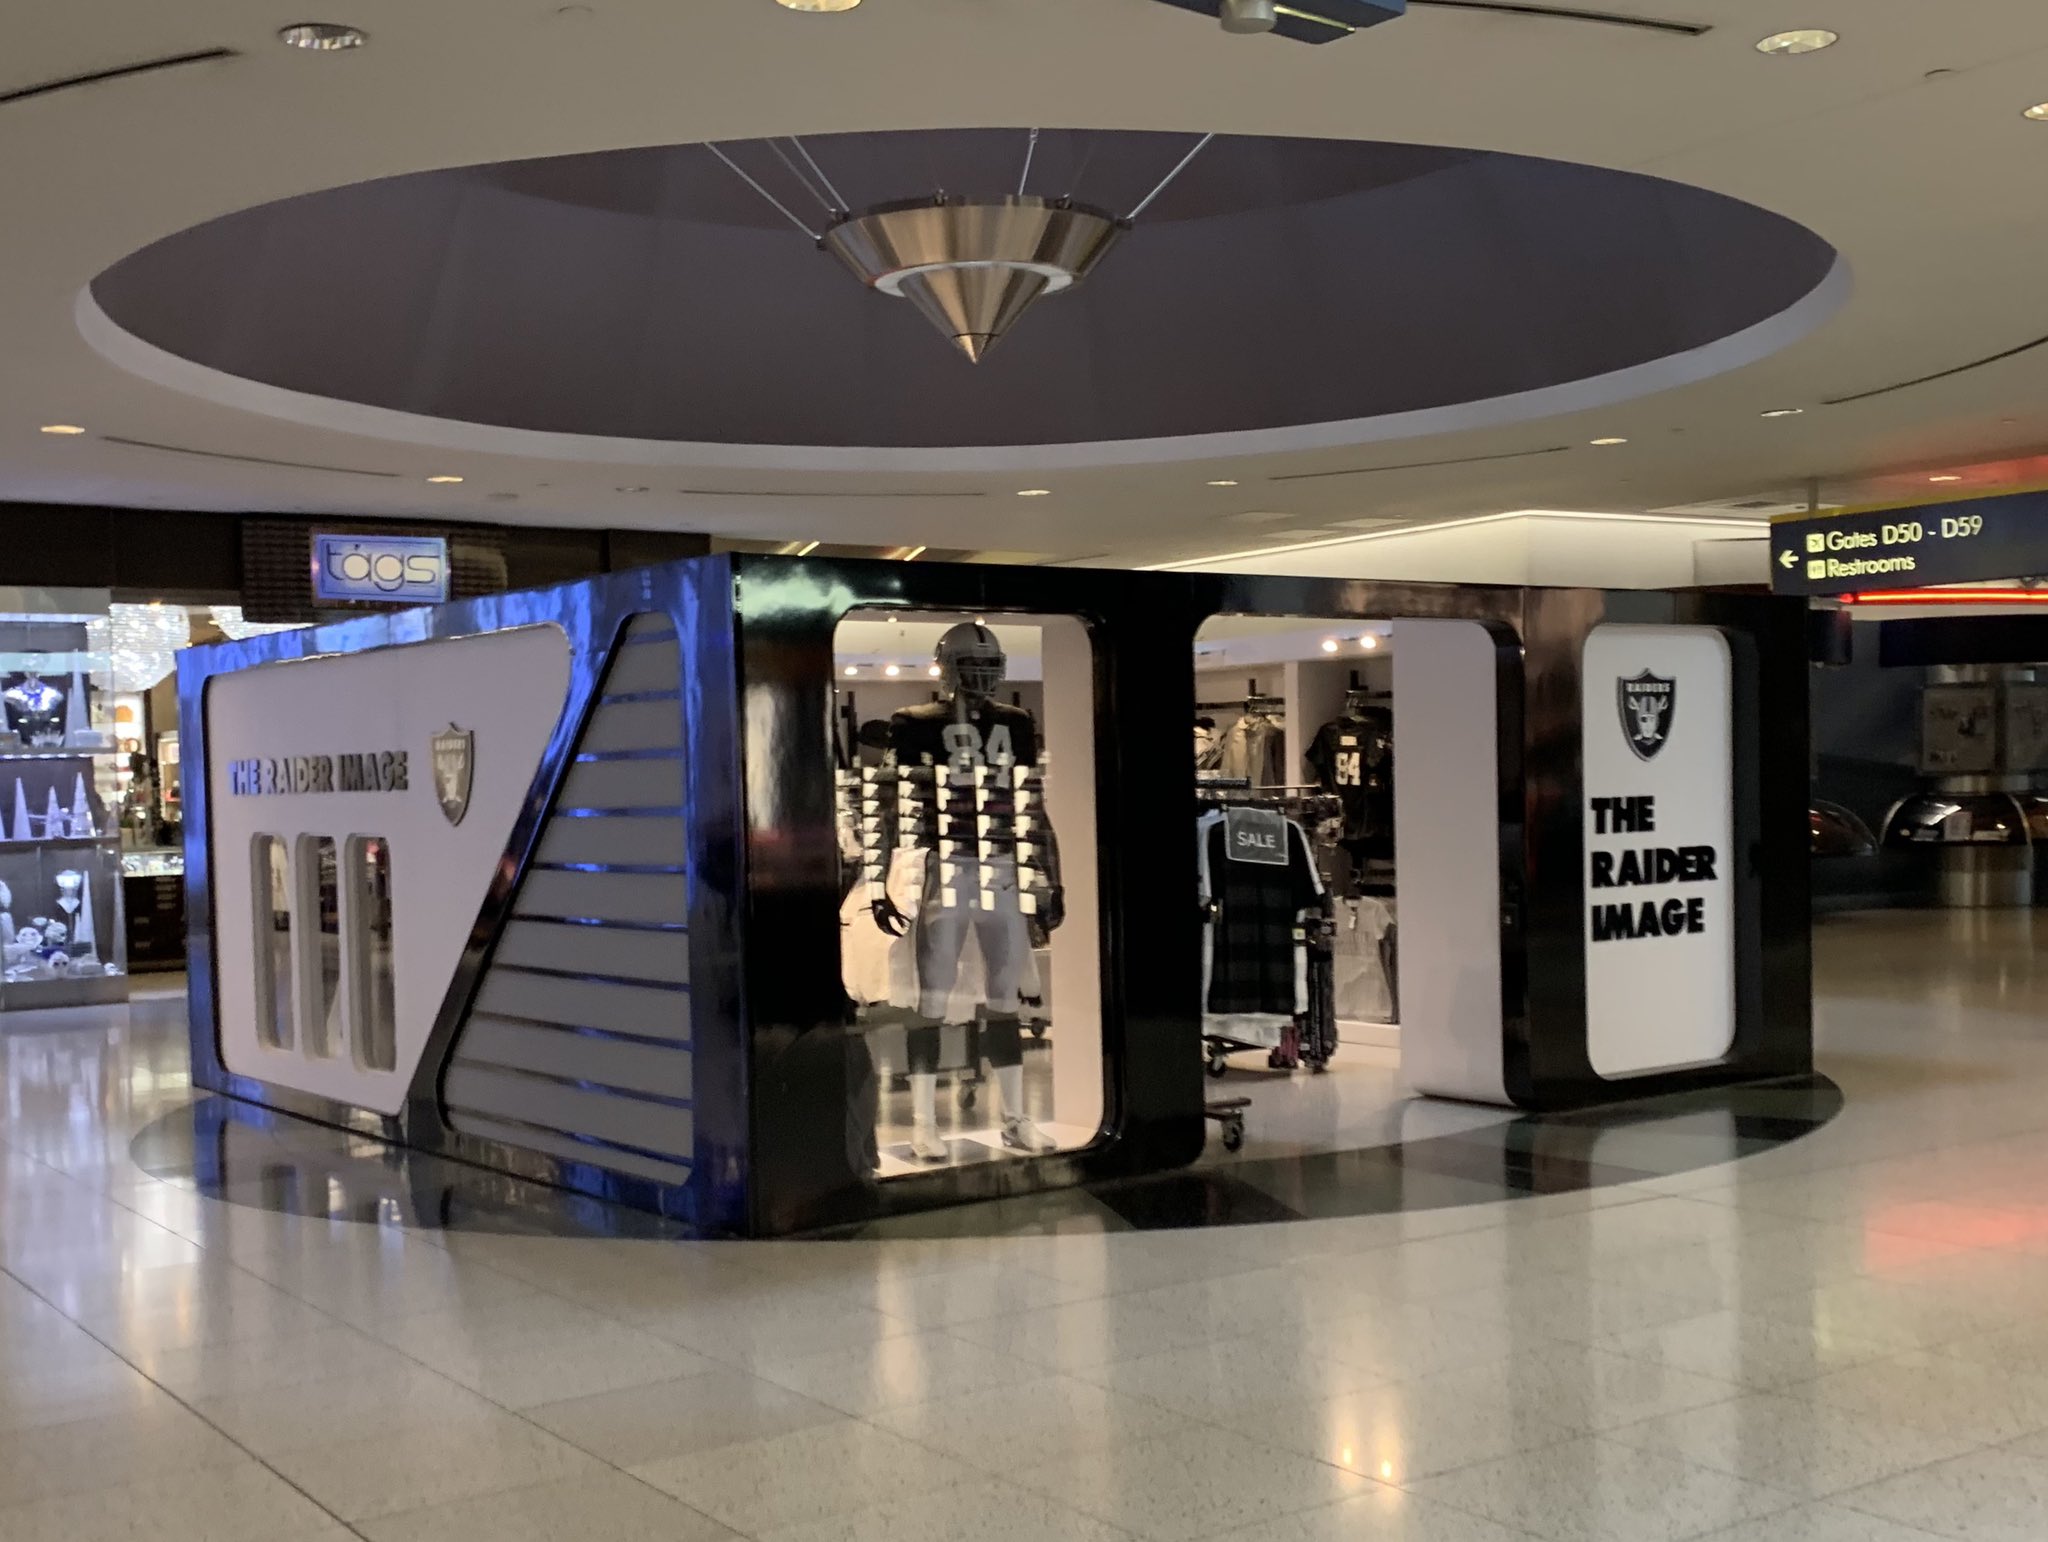 Mick Akers on X: 'International travelers can get in on the @Raiders action  with The Raider Image store inside of Terminal 3 at Las Vegas' McCarran  International Airport. There's also a kiosk